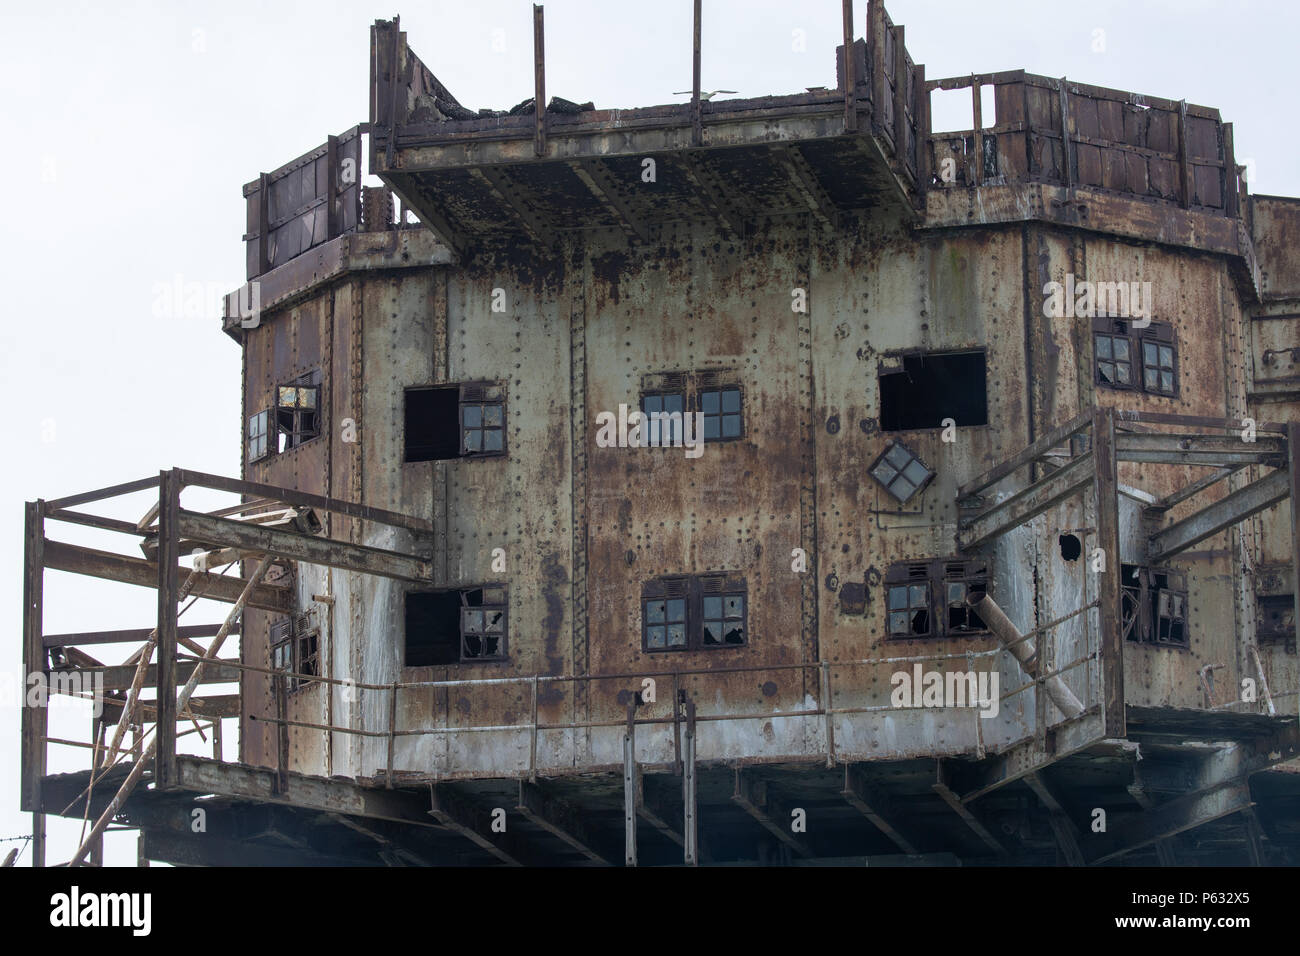 Maunsell Forts - Red Sands sea forts now abandoned, Close up of the disrepair showing rust and damaged windows Stock Photo